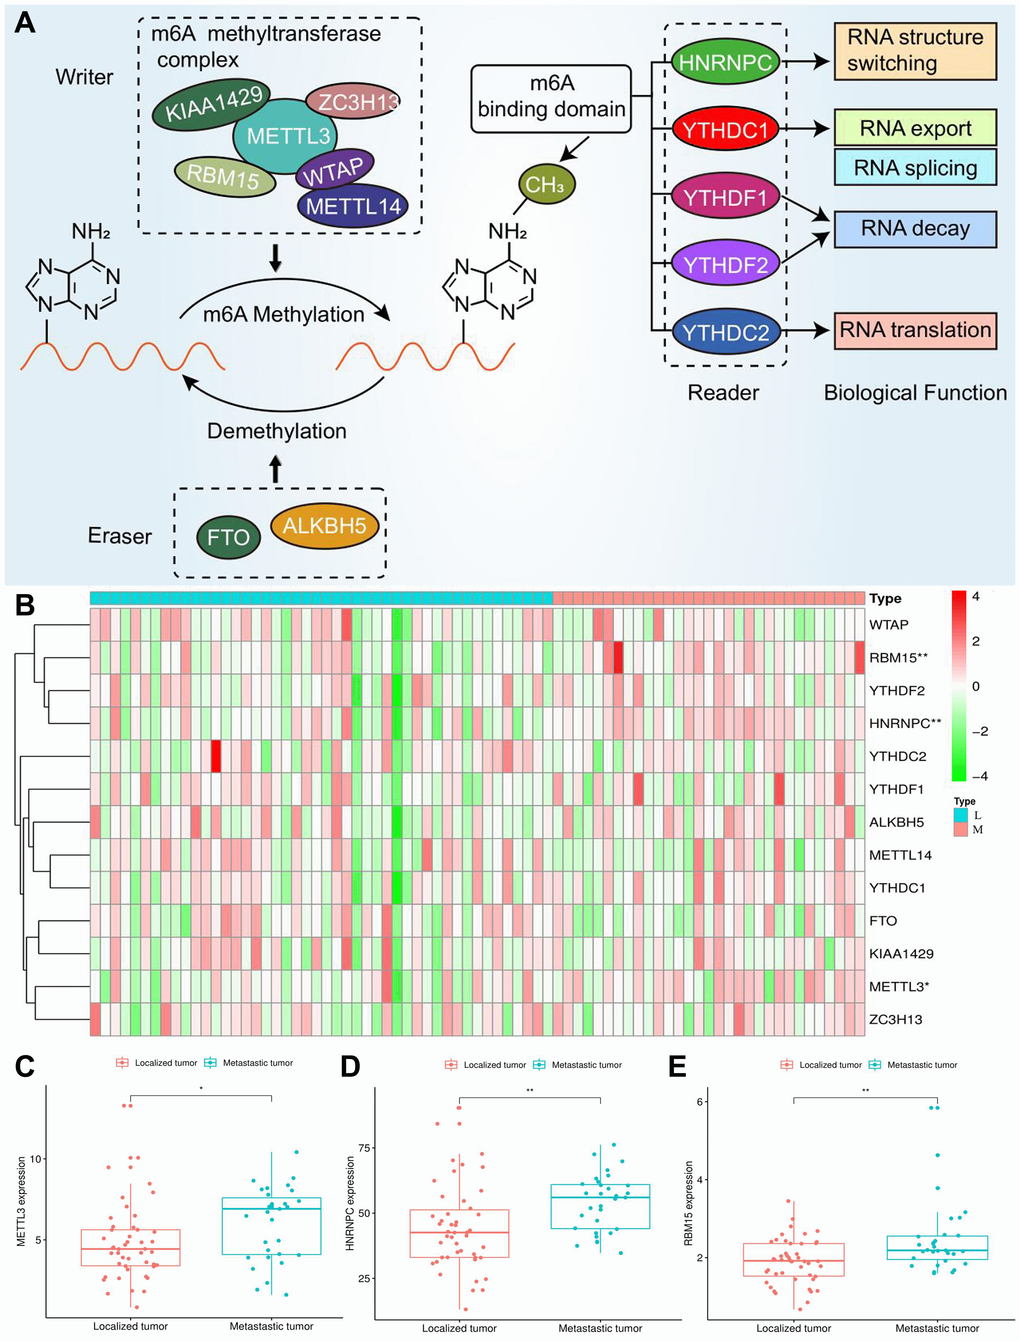 Expression of m6A regulators in ACC. (A) The process and molecular functions of m6A RNA methylation. (B) The expressive heatmap of m6A-related genes. The gene symbols are on the right of the heatmap. L, localized tumor (n = 46). M, metastatic tumor (n = 31). High expression is shown in red and low expression is green. (C–E) Differential expression of METTL3, HNRNPC and RBM15 between localized and metastatic tumor samples. Gene expression is measured by FPKM. FPKM, Fragments Per Kilobase per Million. *P **P 